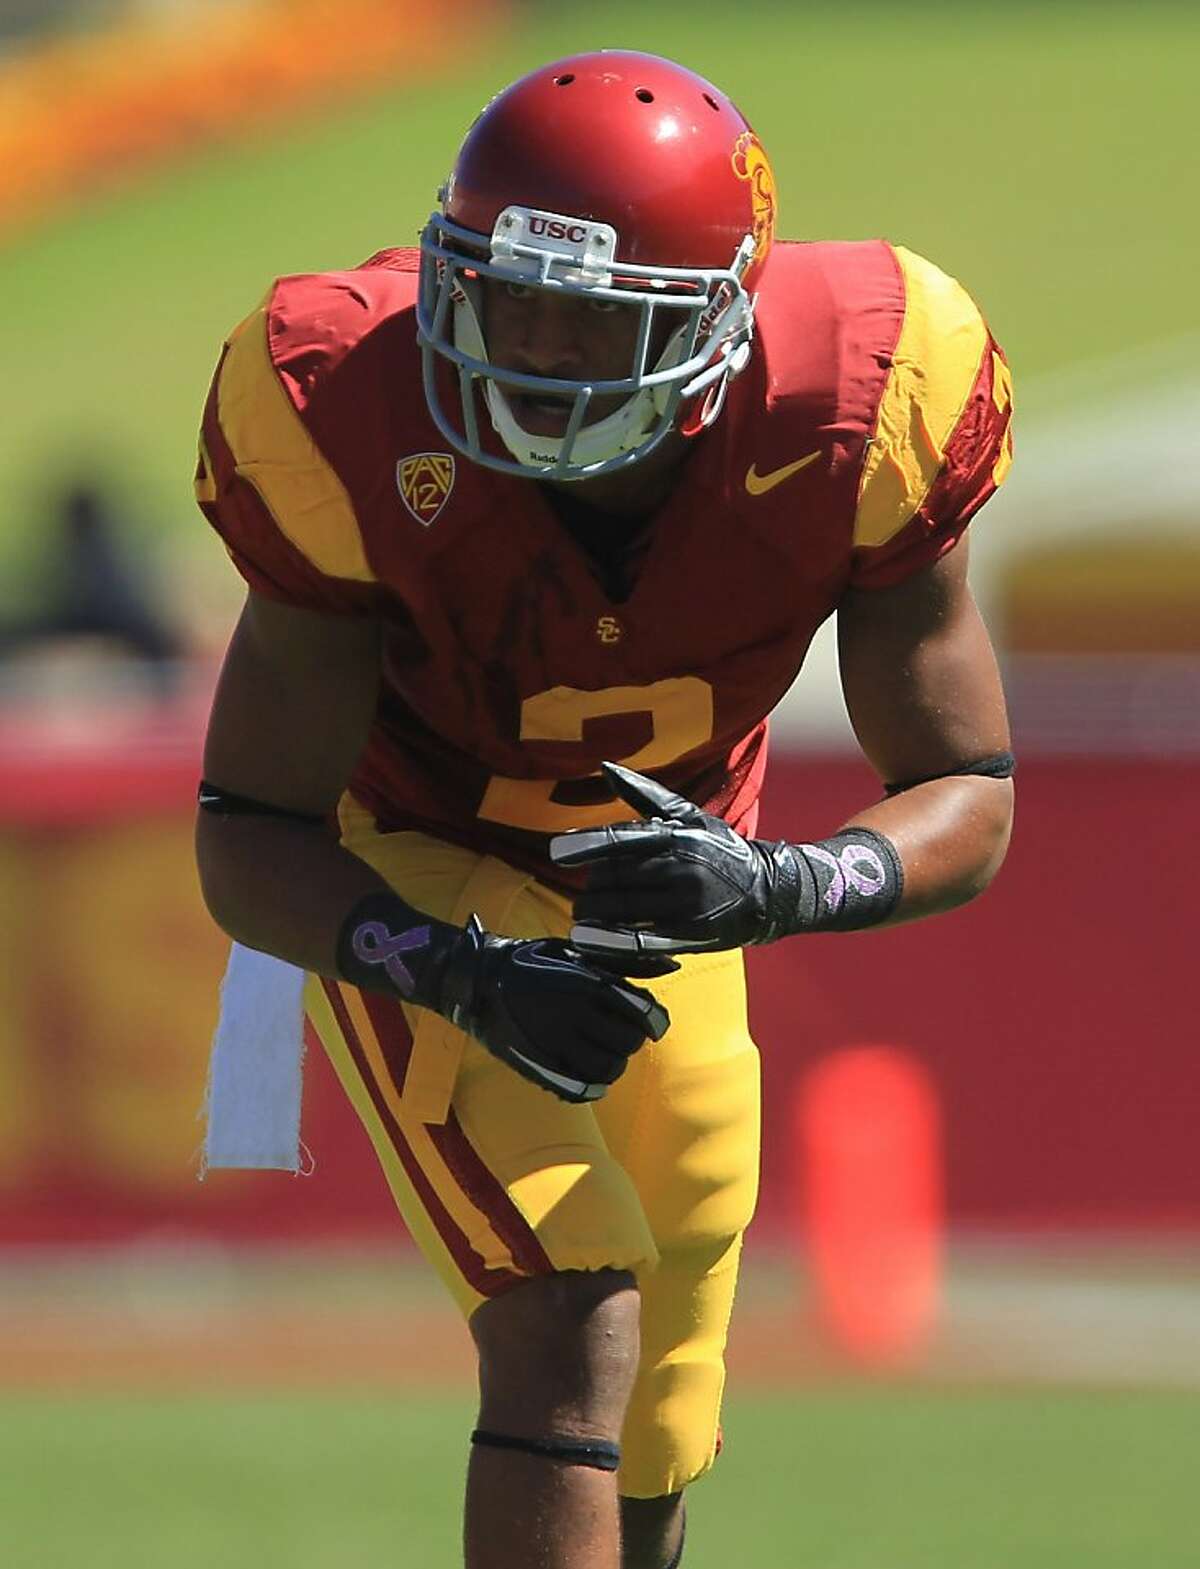 USC WR Robert Woods during an NCAA college football game against Arizona Saturday, Oct. 1, 2011, in Los Angeles. USC defeated Arizona 48-41. (AP Photo/Ben Liebenberg)